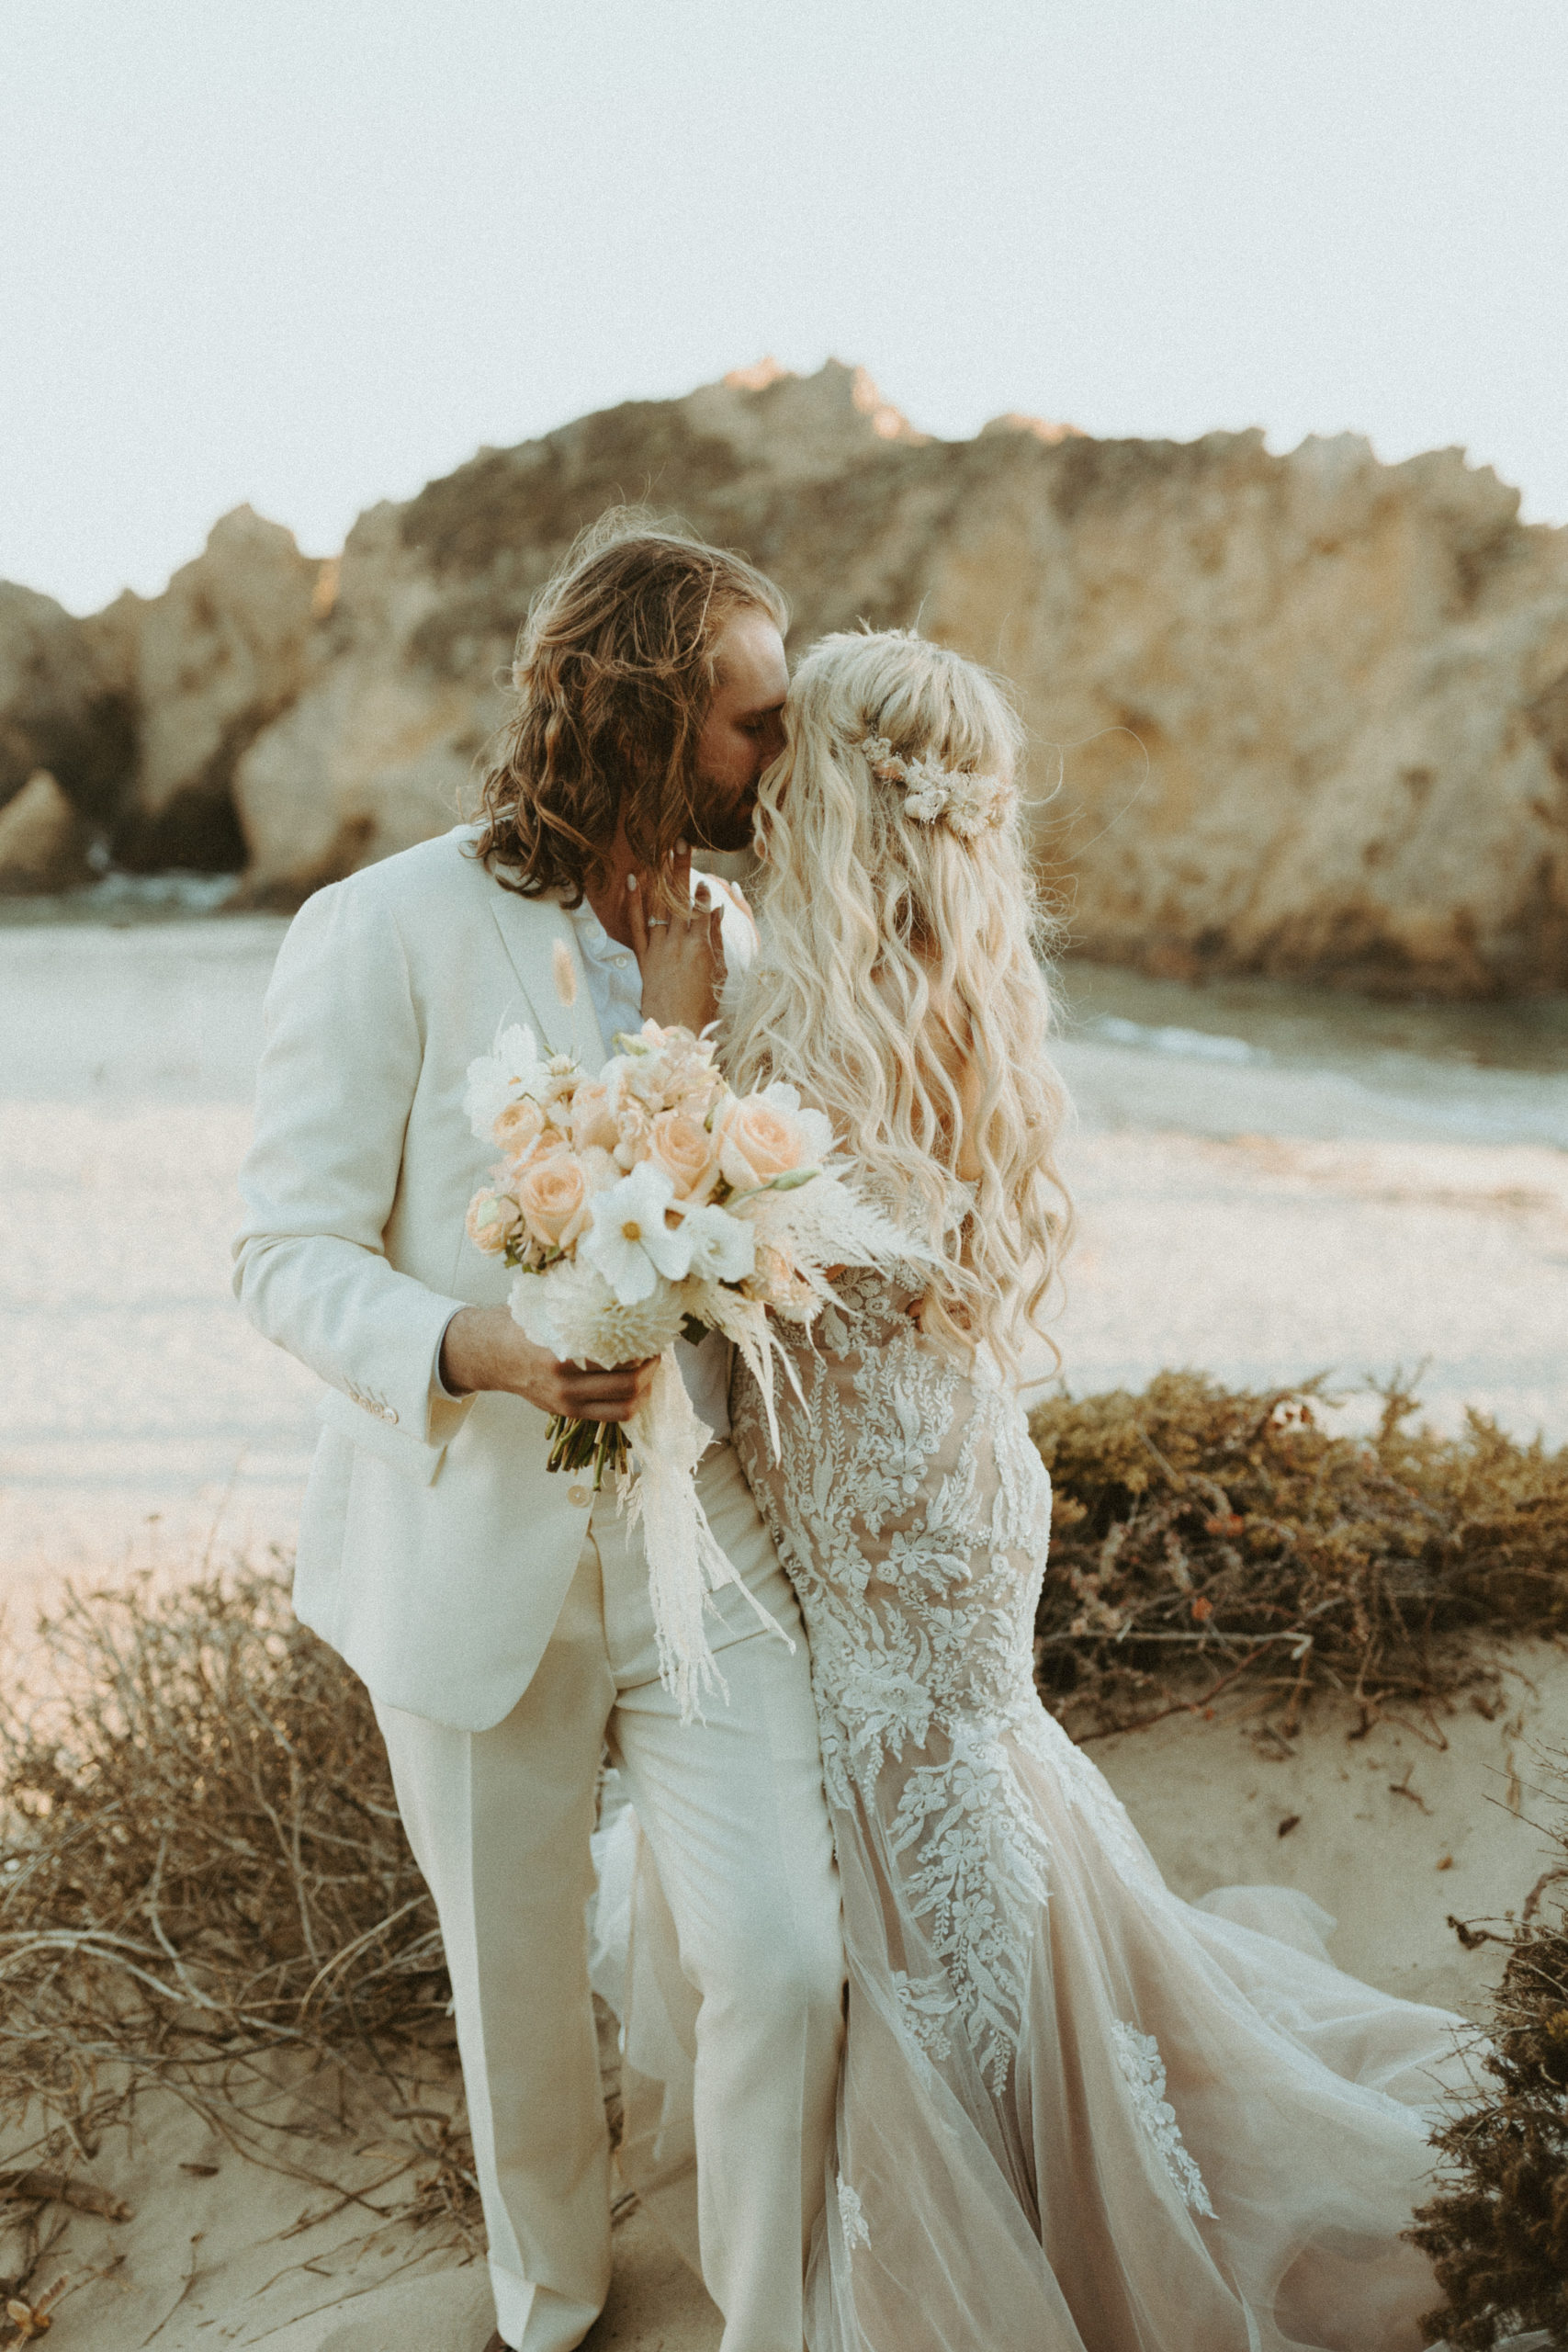 the couple touching noses at their Big Sur wedding